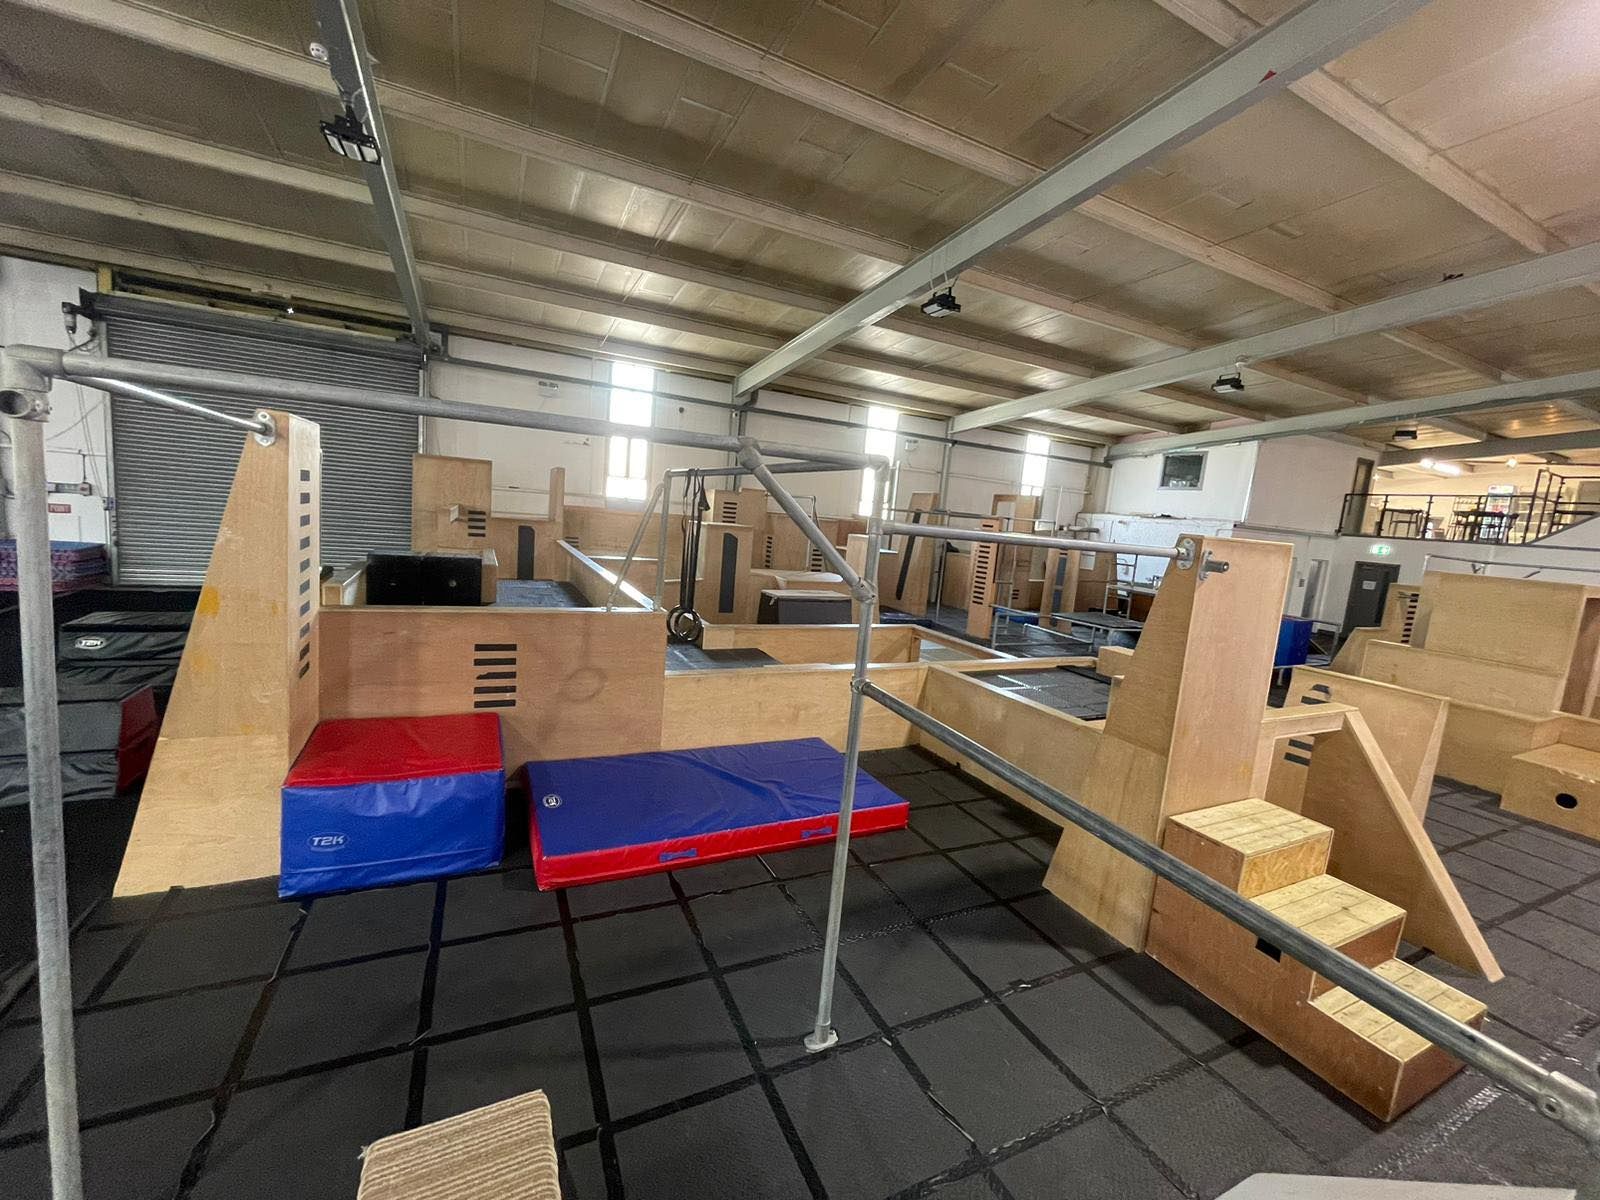 A gym filled with parkour equipment